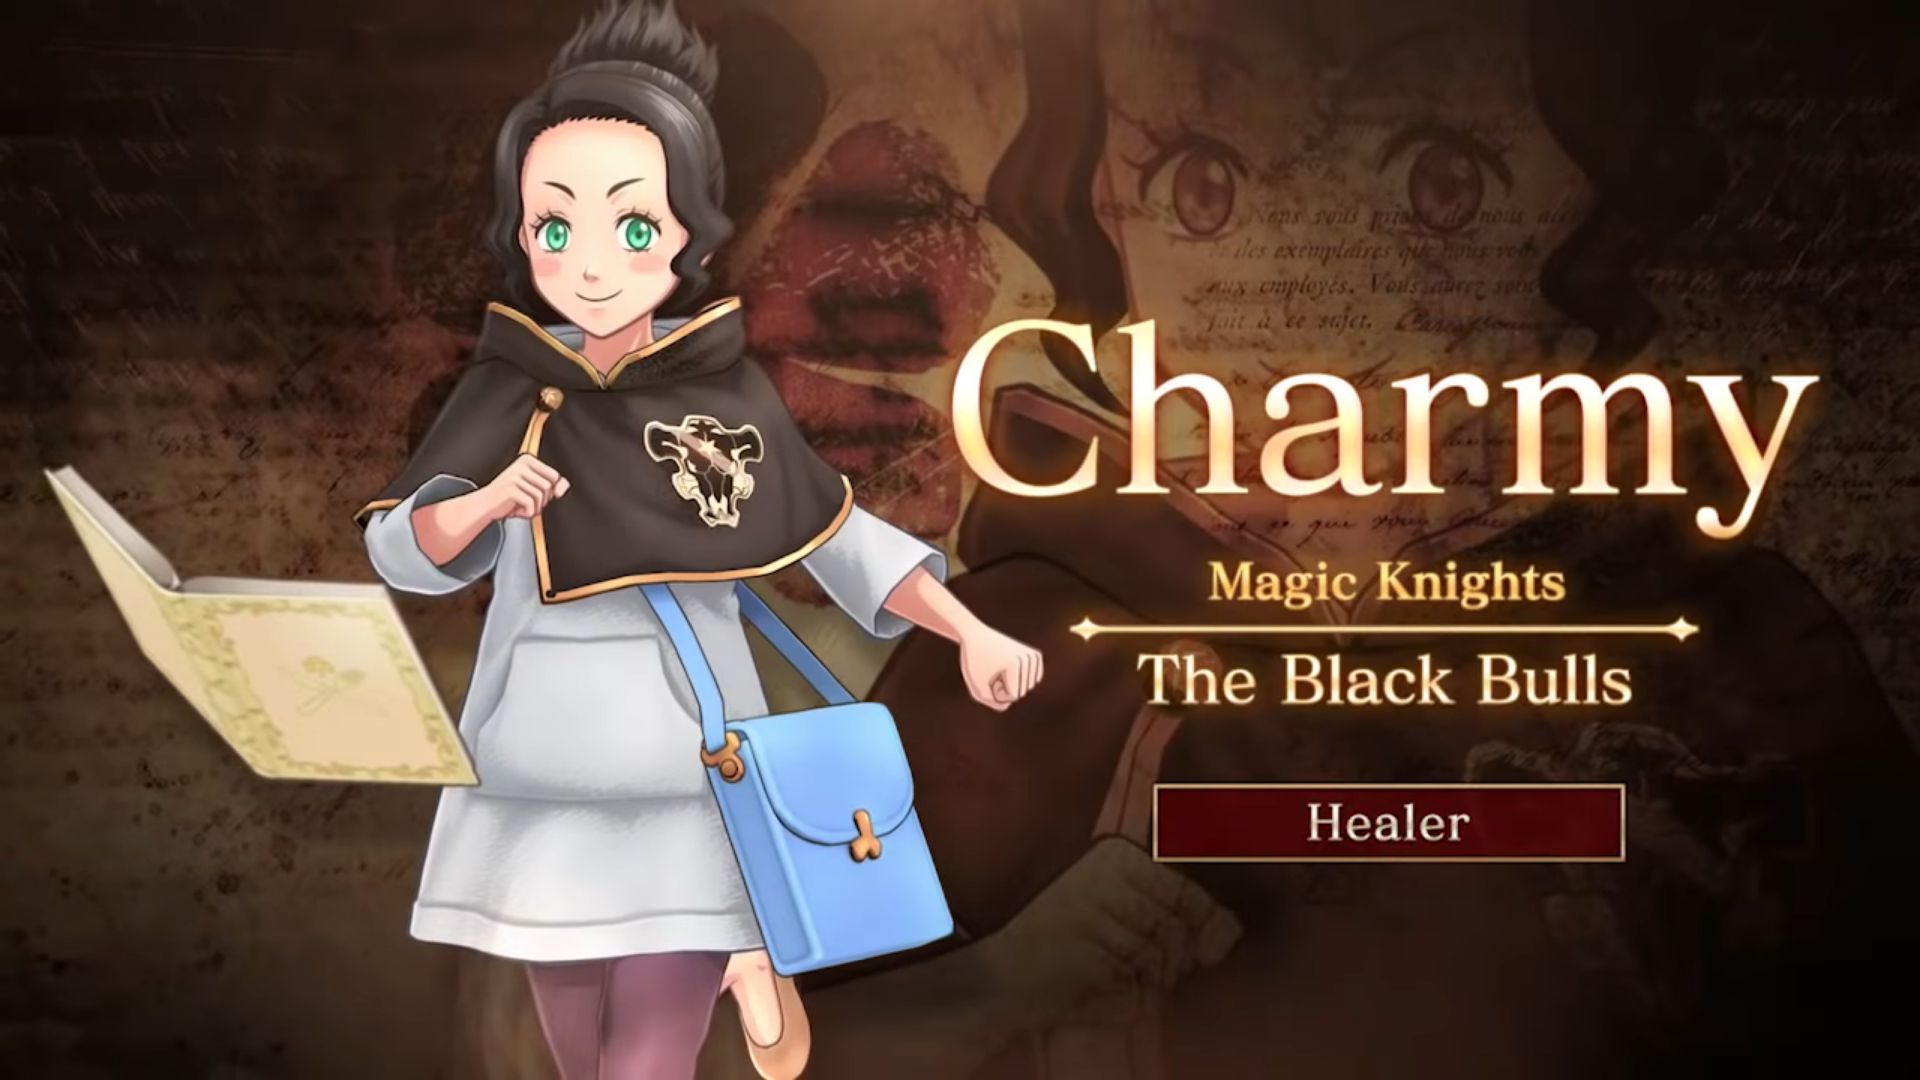 Black Clover: Quartet Knights for PS4 and PC Introduces Charmy